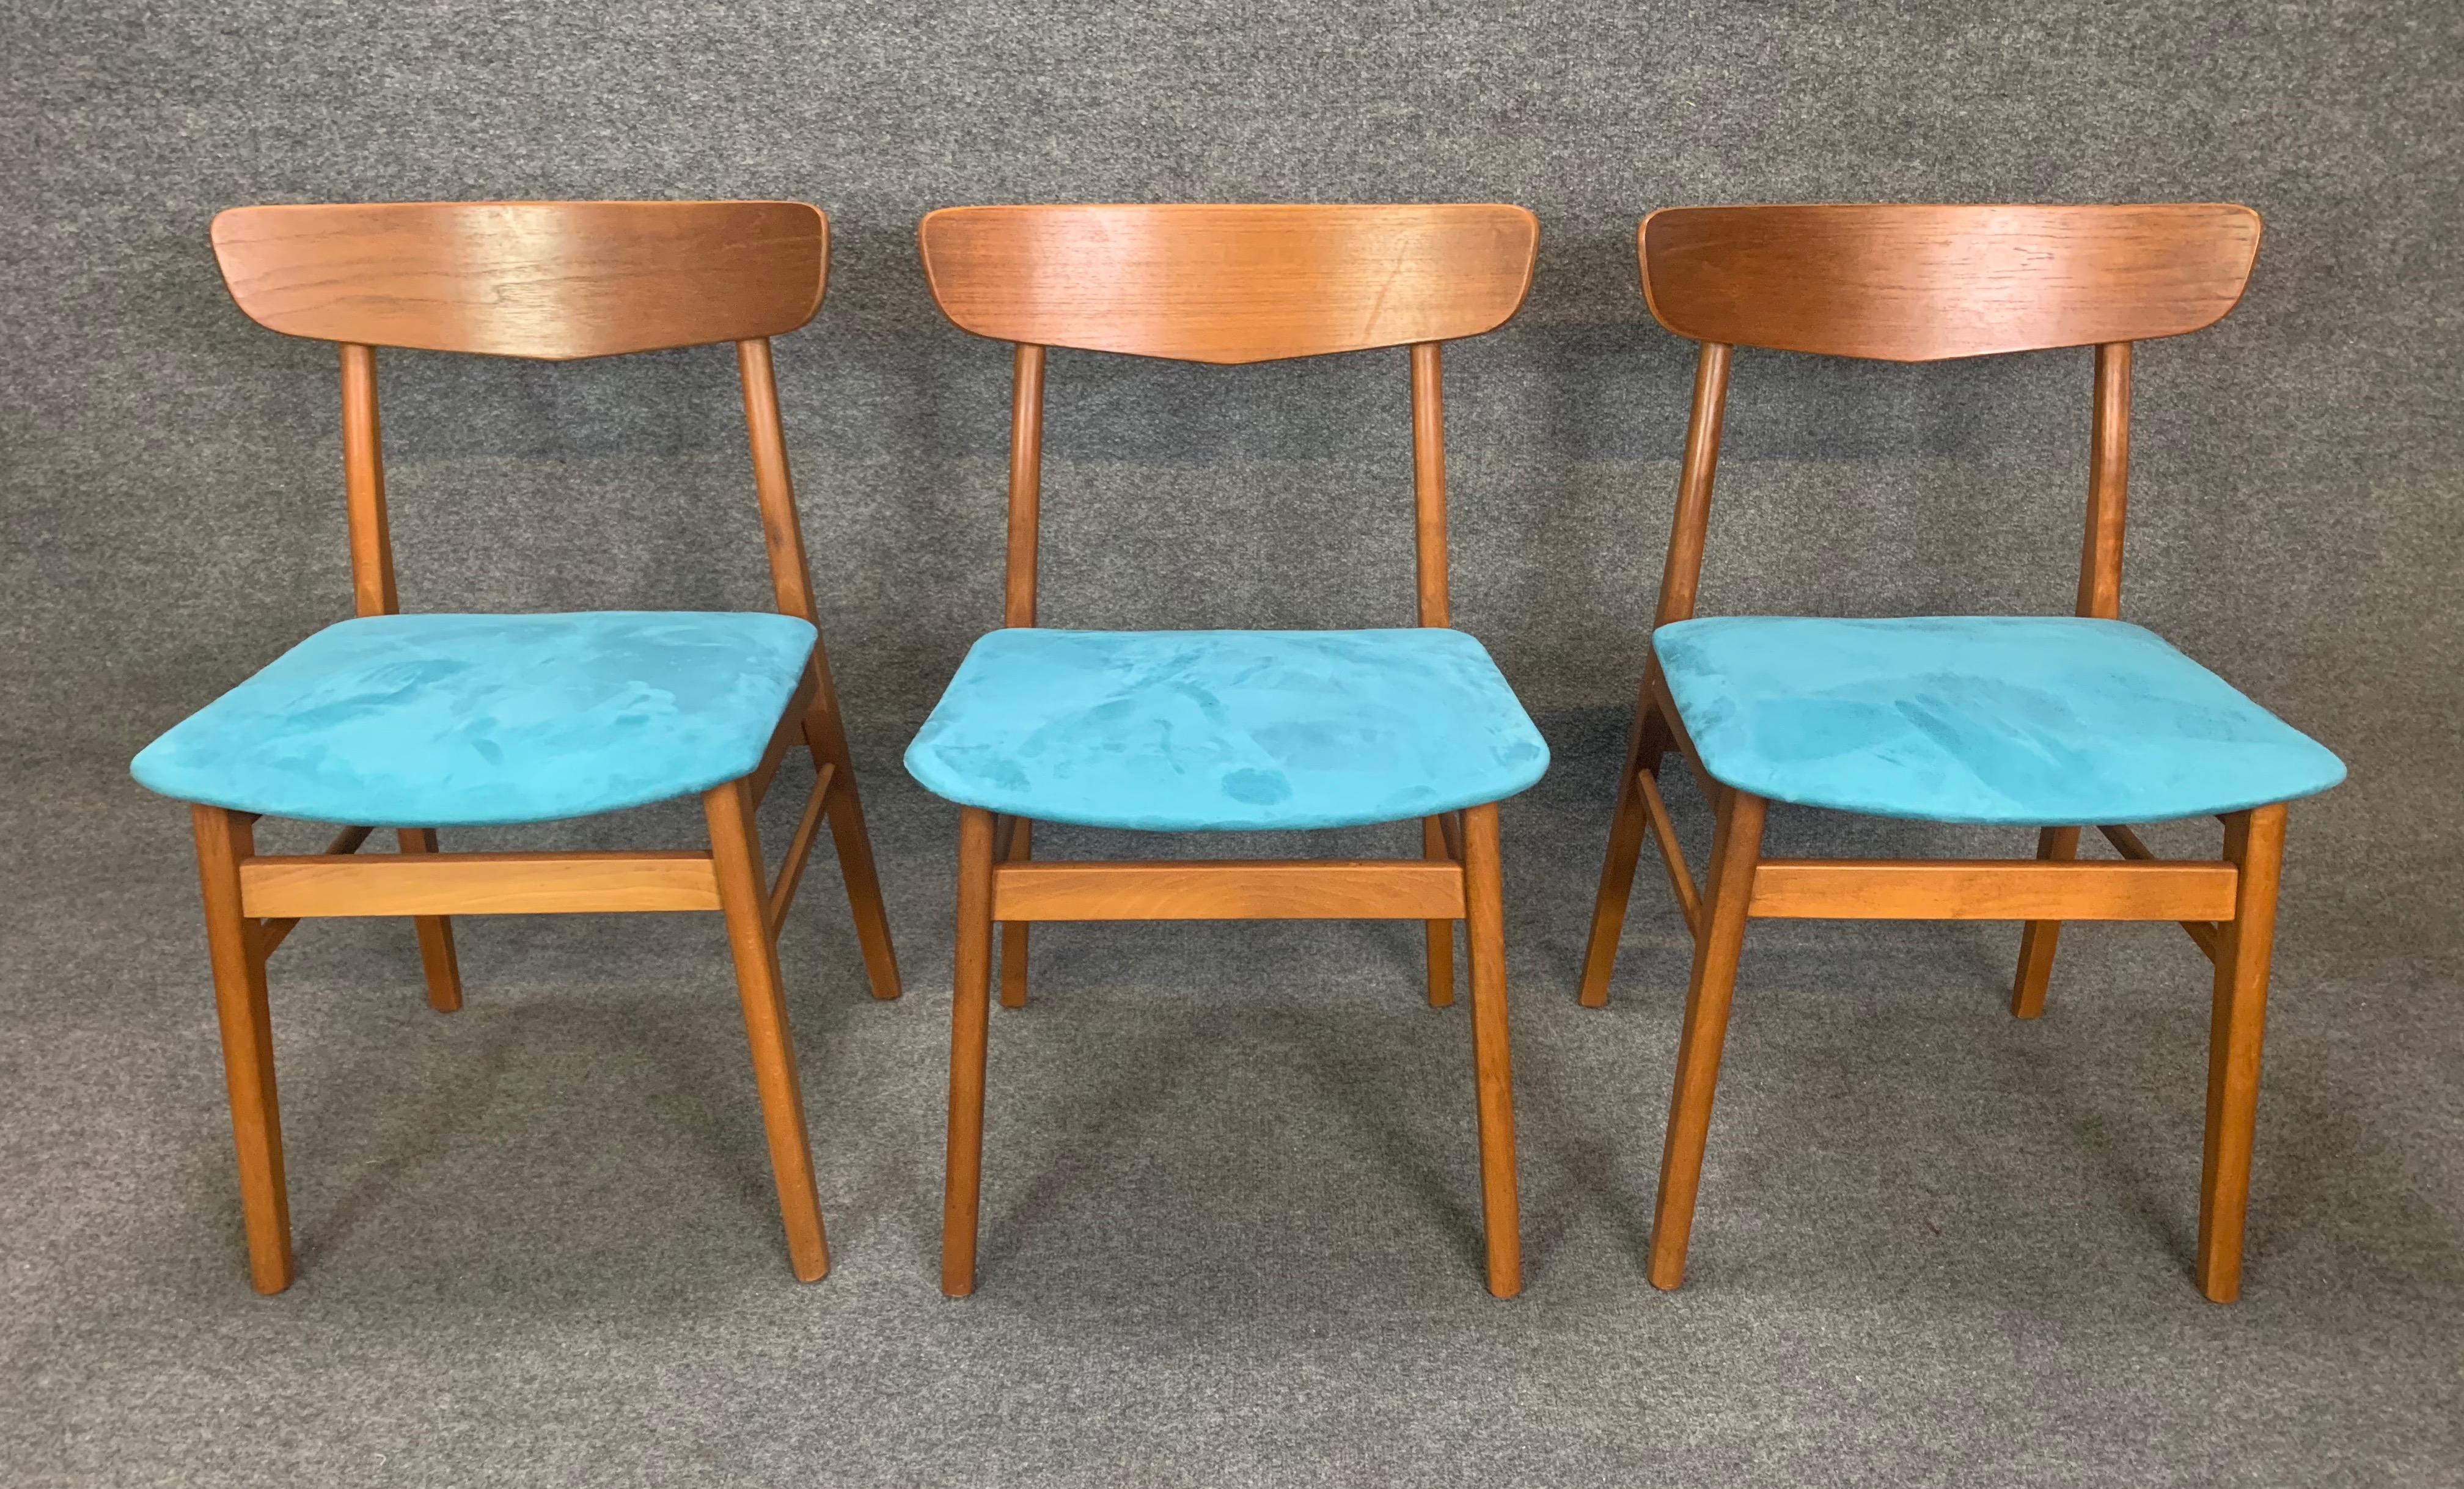 Set of Six Vintage Midcentury Danish Modern Teak Dining Chairs by Findhahls For Sale 3